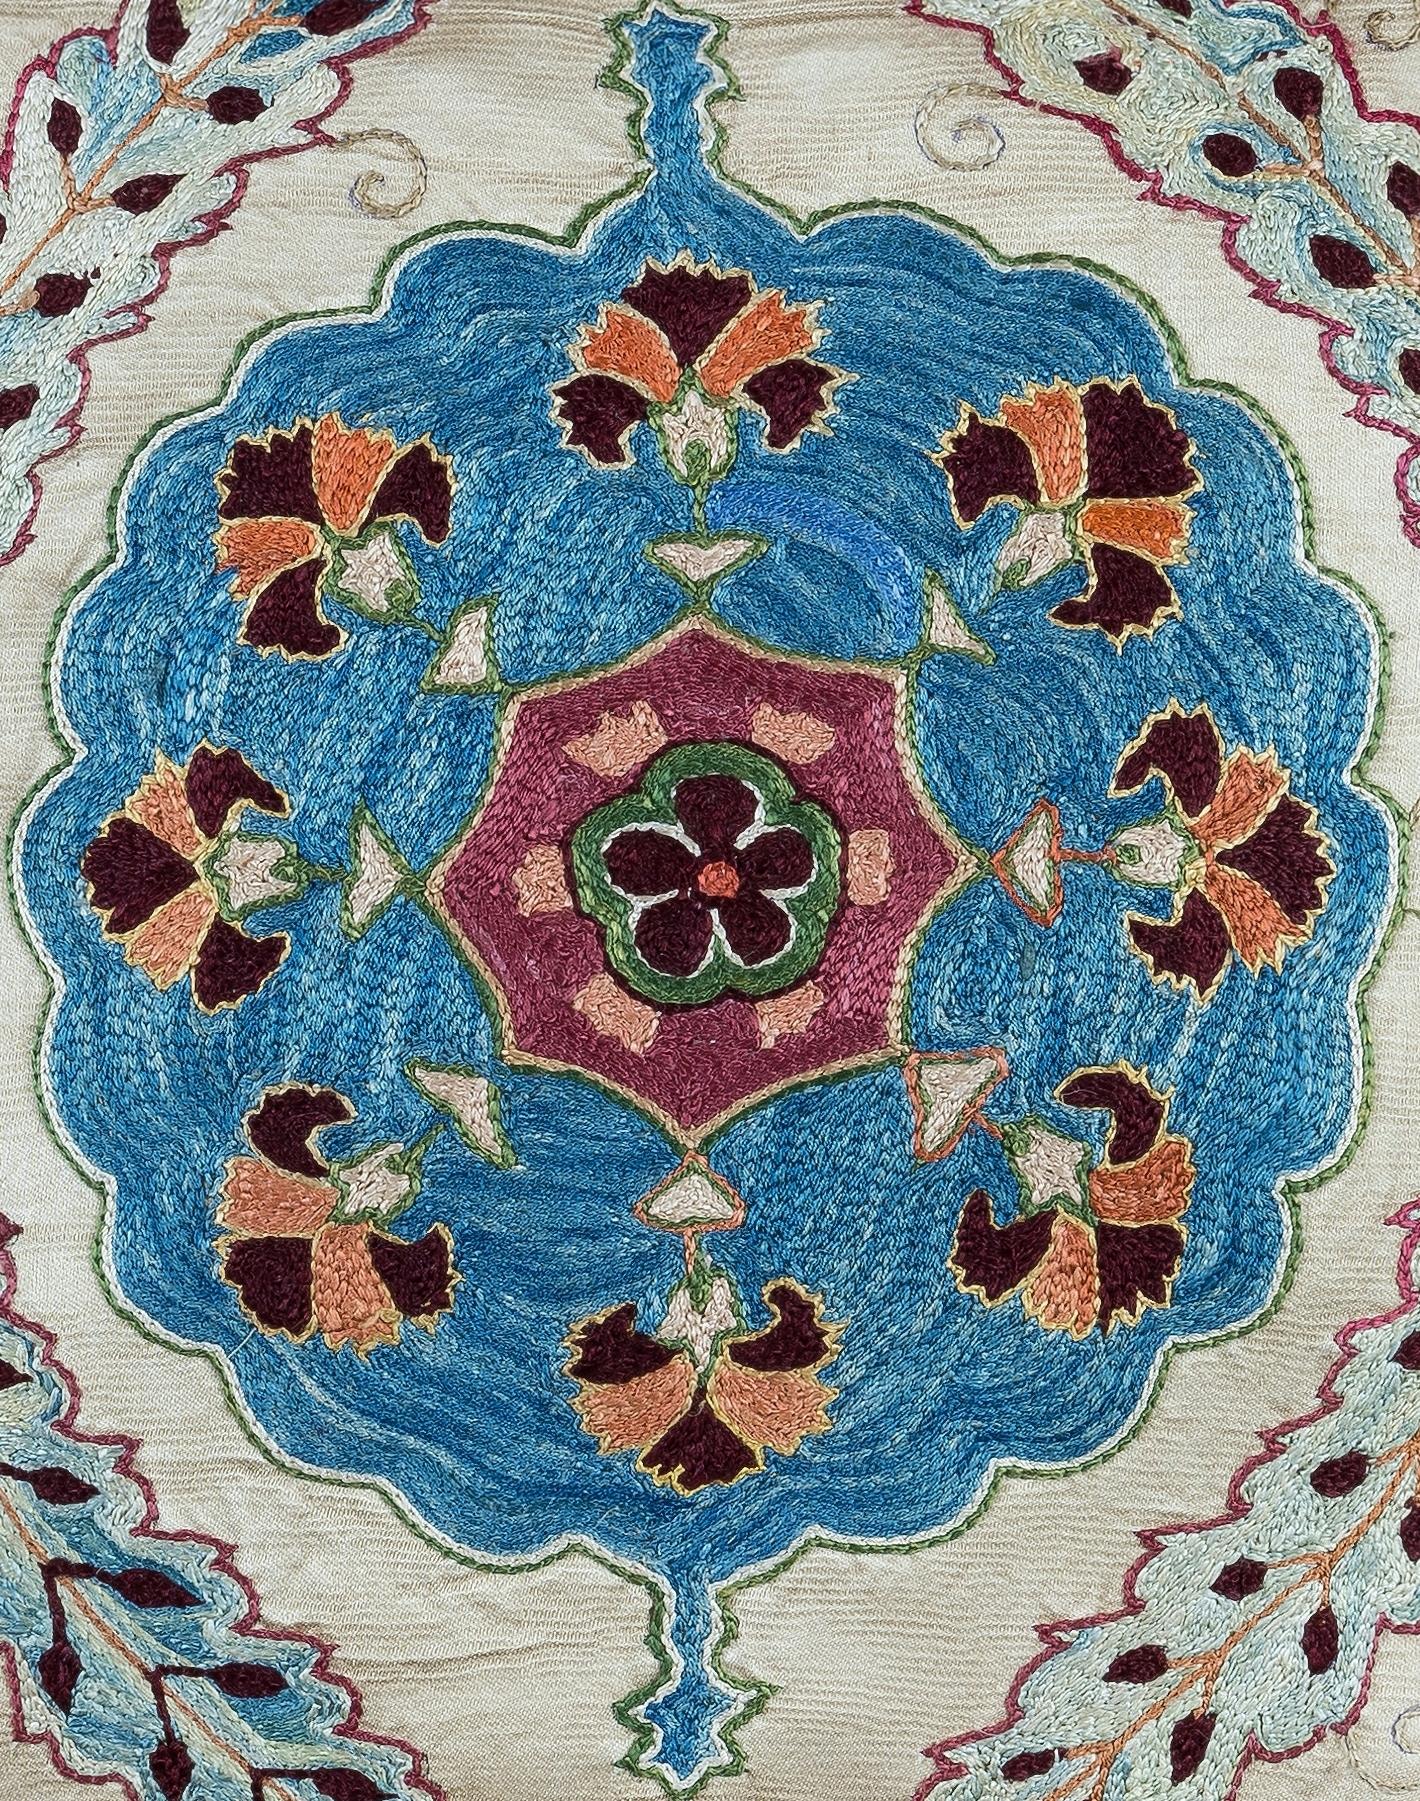 Decorative suzani cushion cover made of hand embroidery silk on silk background, flowers and vine motifs, linen backing with zipper, no insert.

Delicate and specialised washing advised.

Suzani is a type of hand-embroidered and decorative tribal